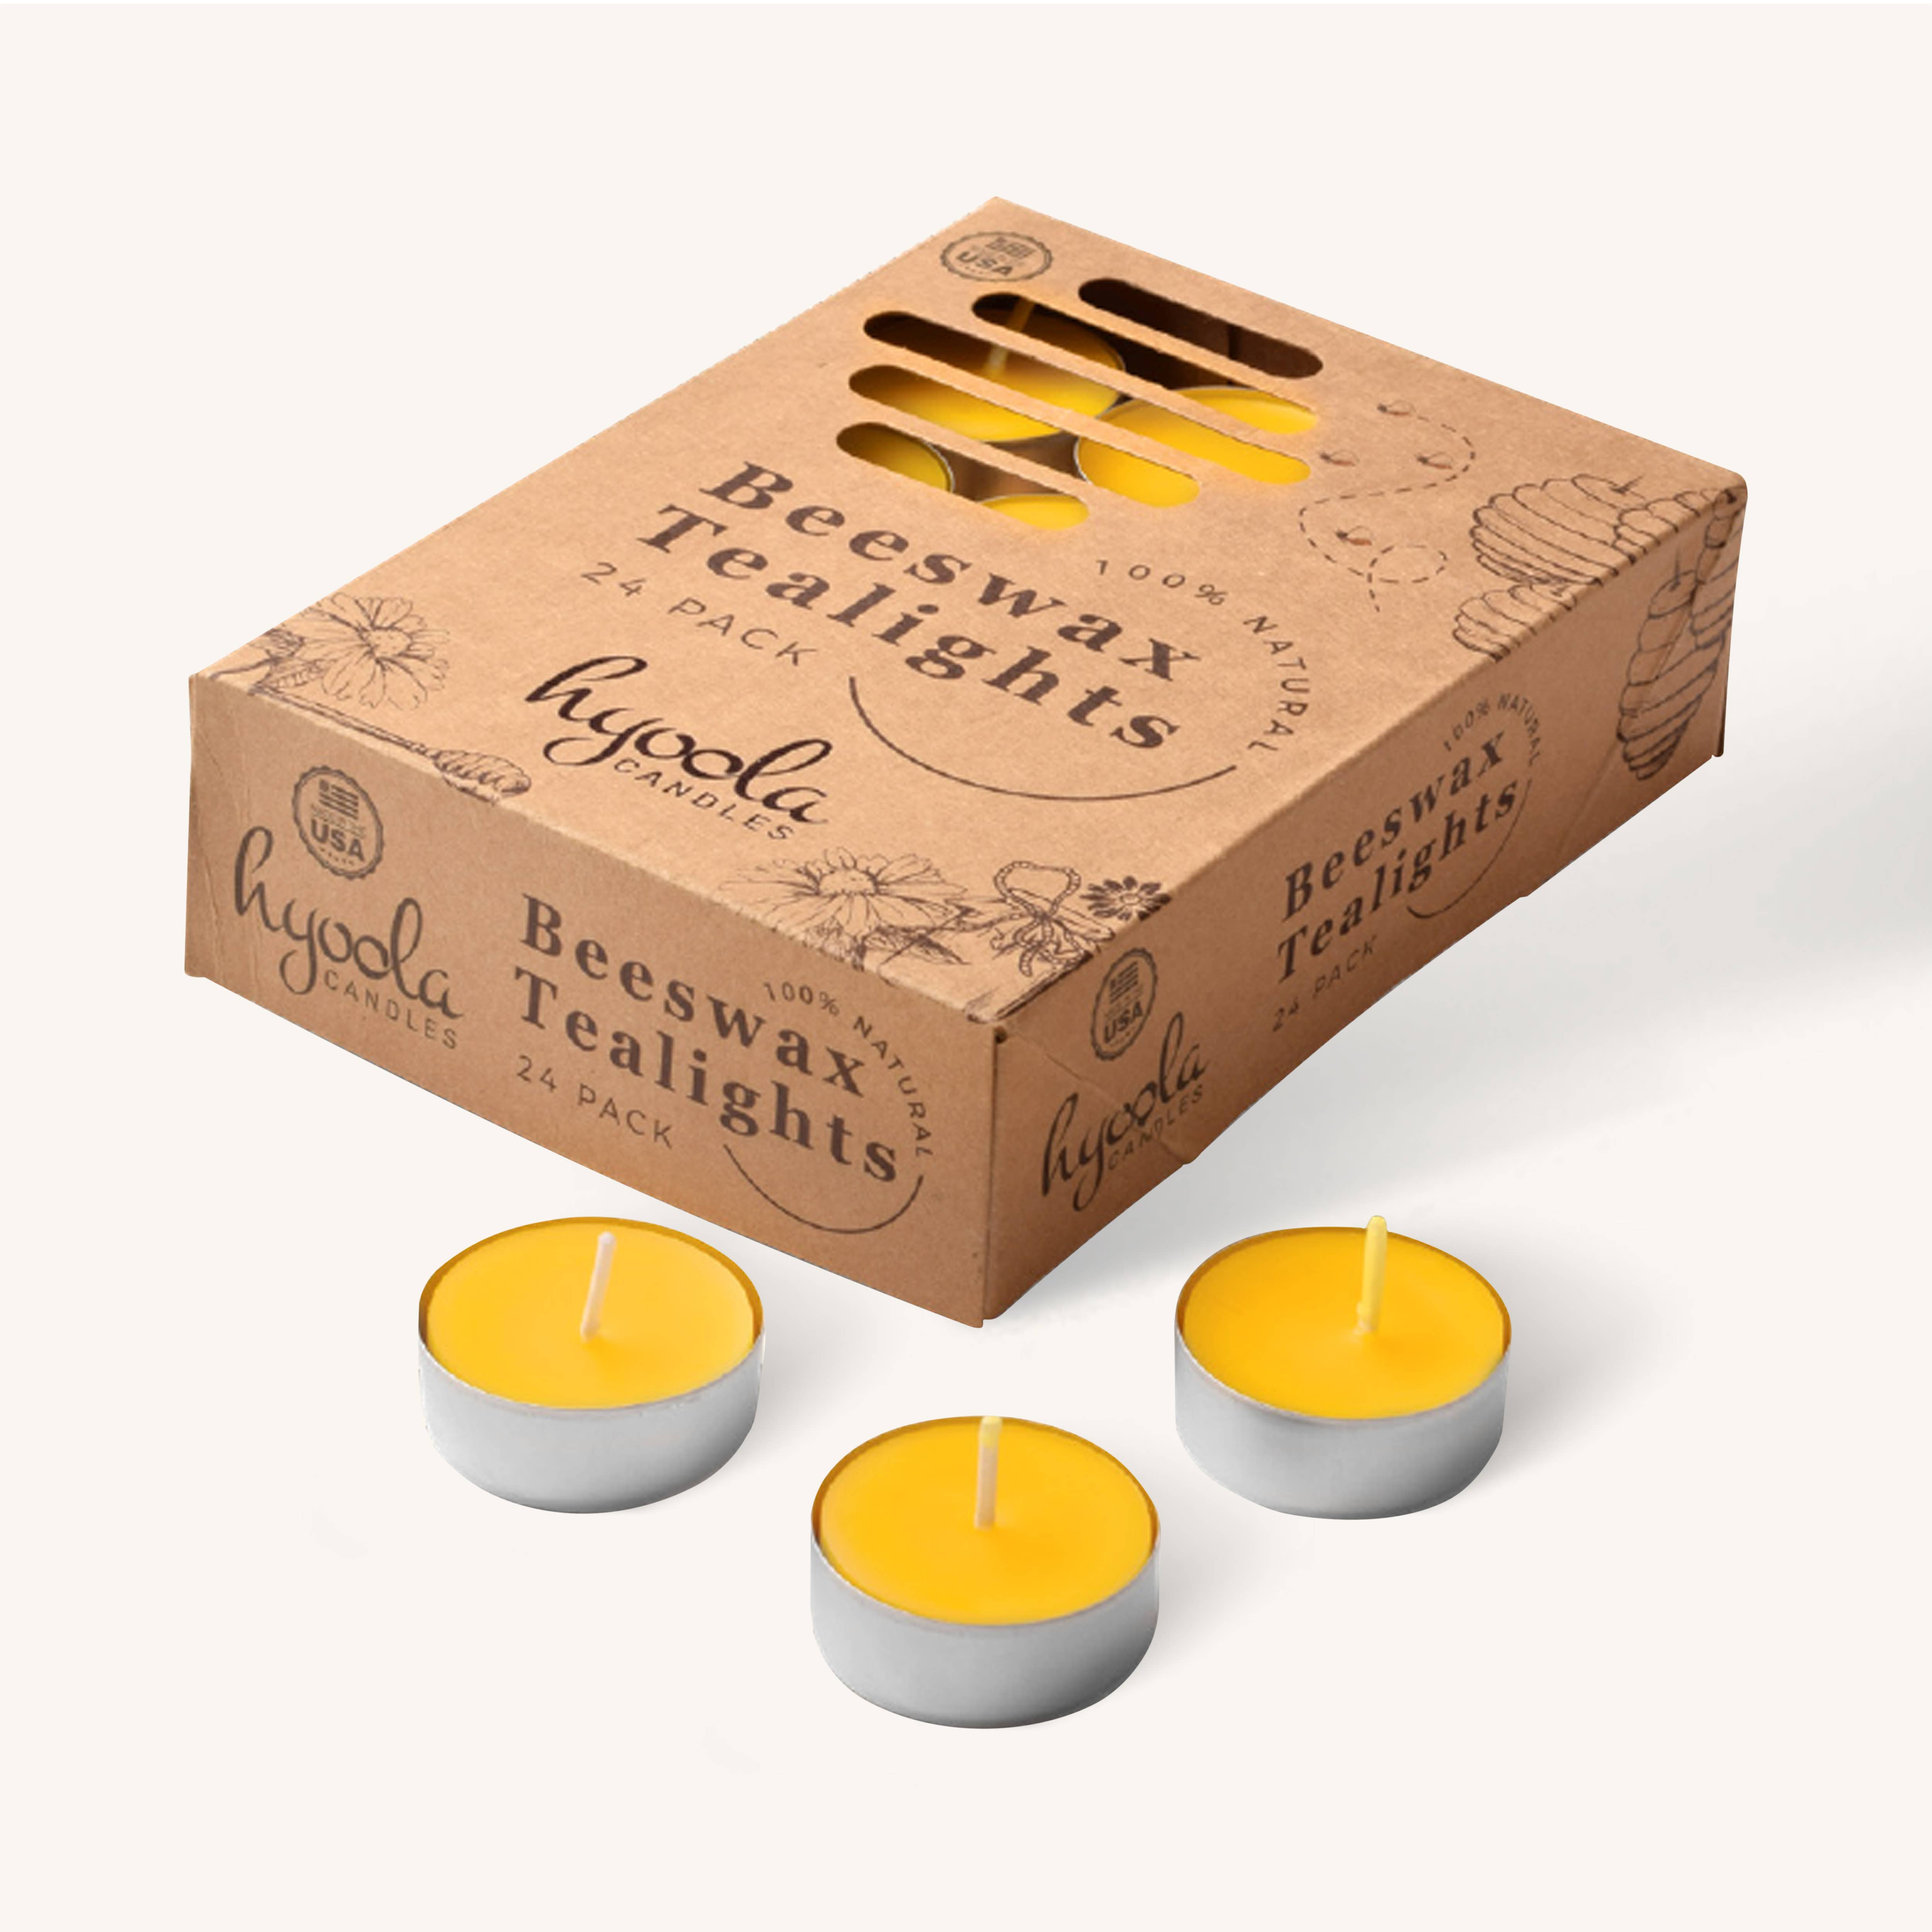 Yellow Beeswax Tealights in Aluminum Cup - 4 Hours - 24 Pack